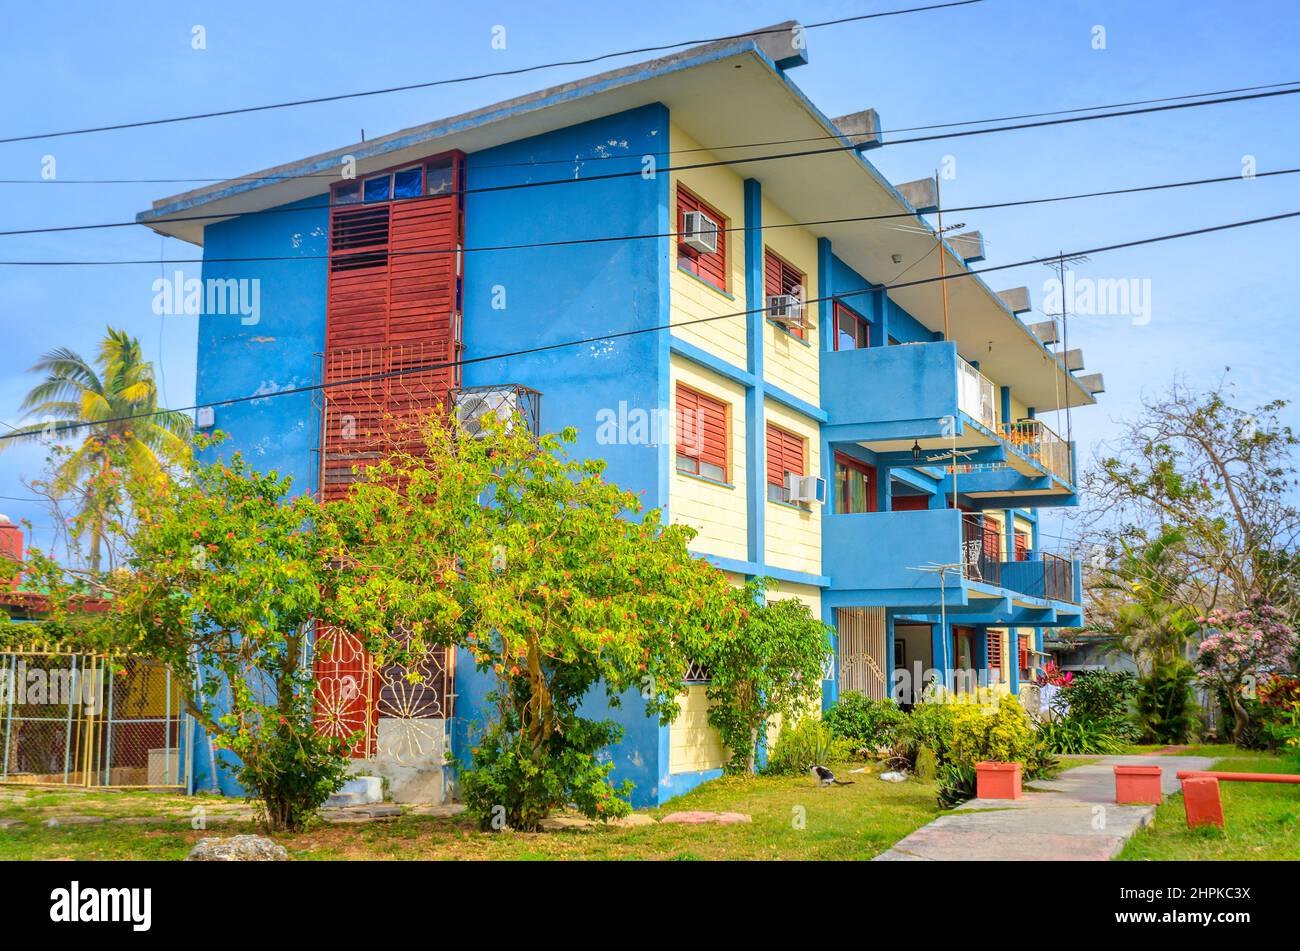 Residential houses on the outskirts of Havana, Cuba Stock Photo